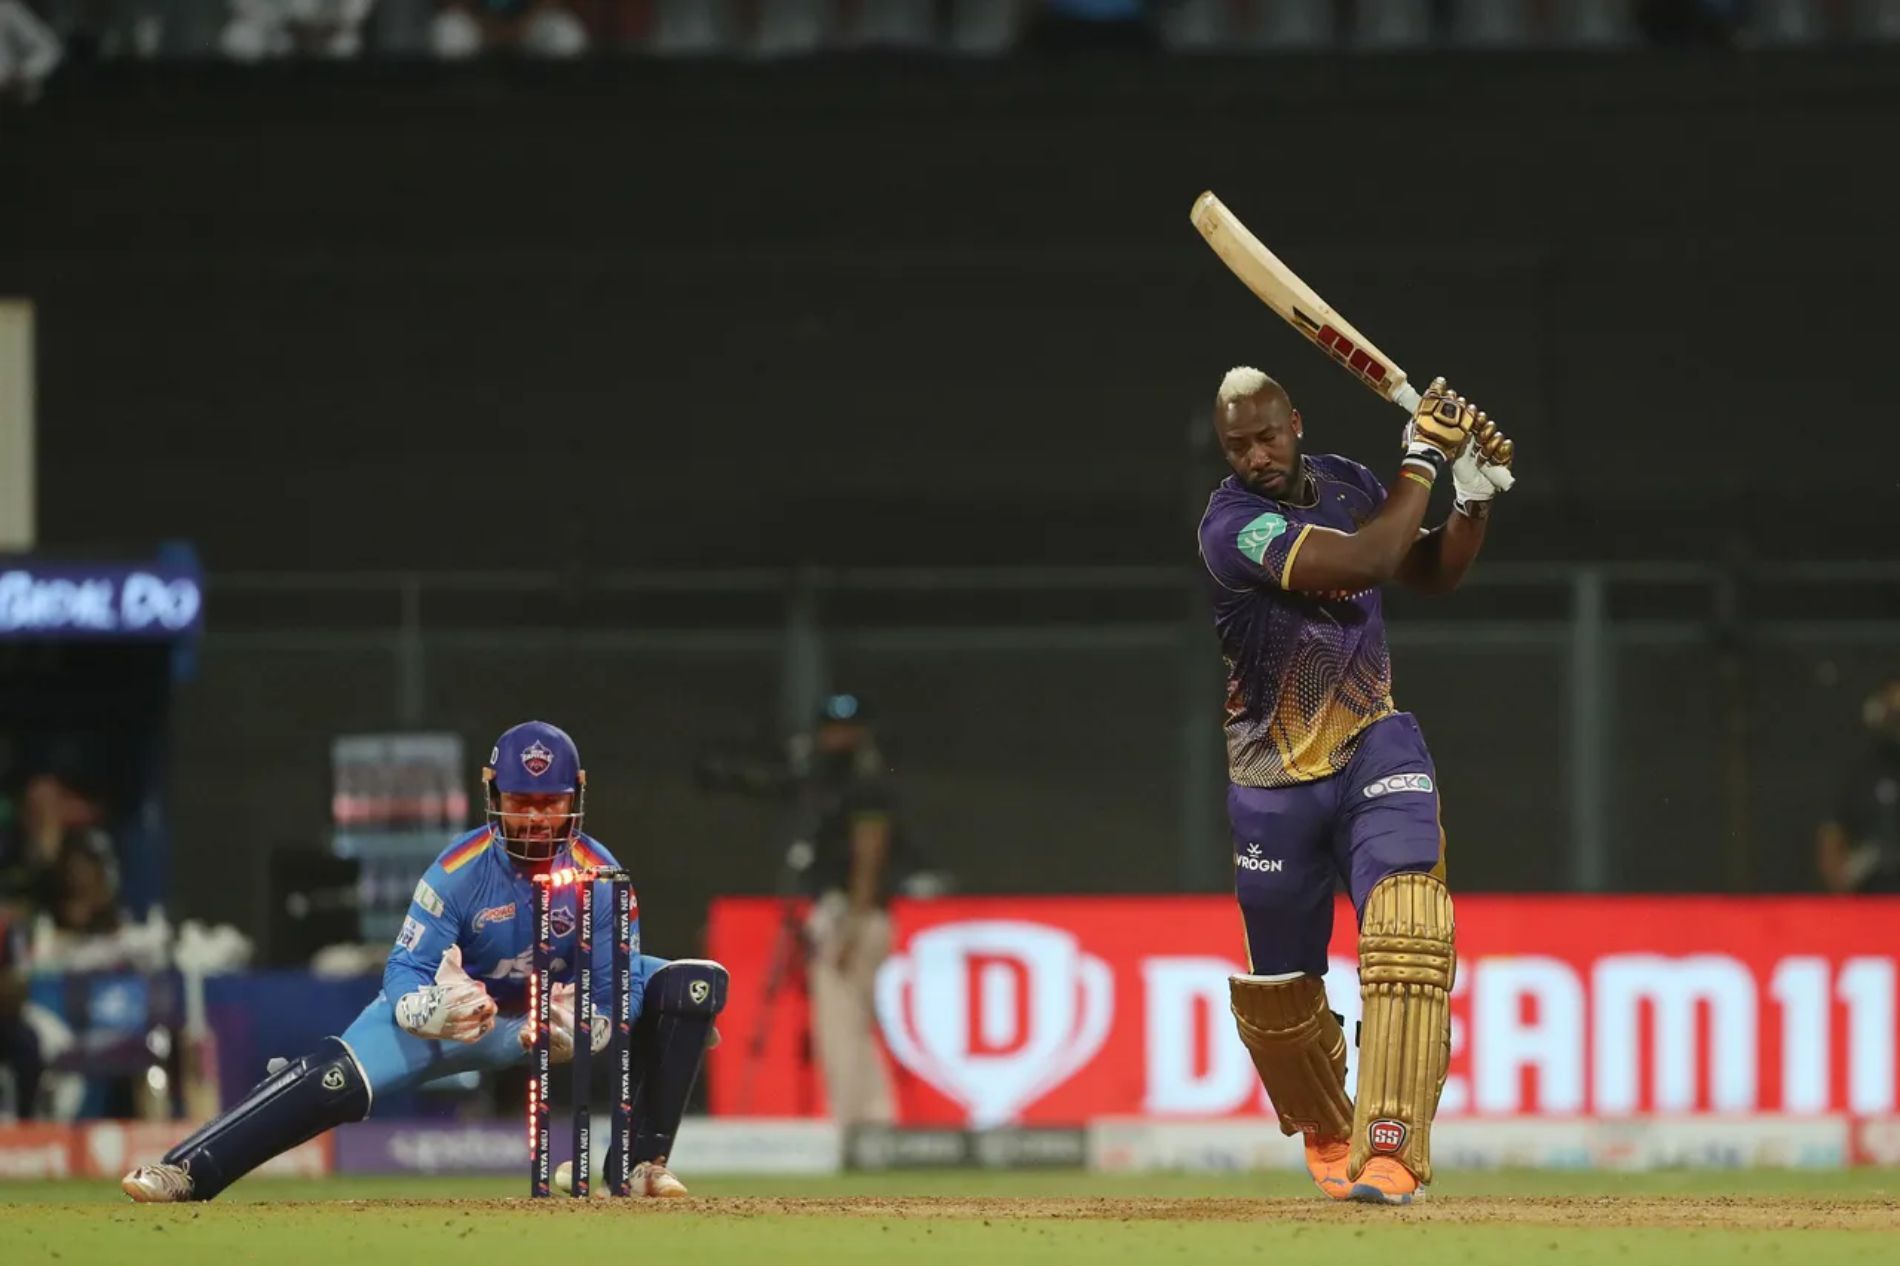 KKR batter Andre Russell is stumped by Rishabh Pant. Pic: IPLT20.COM